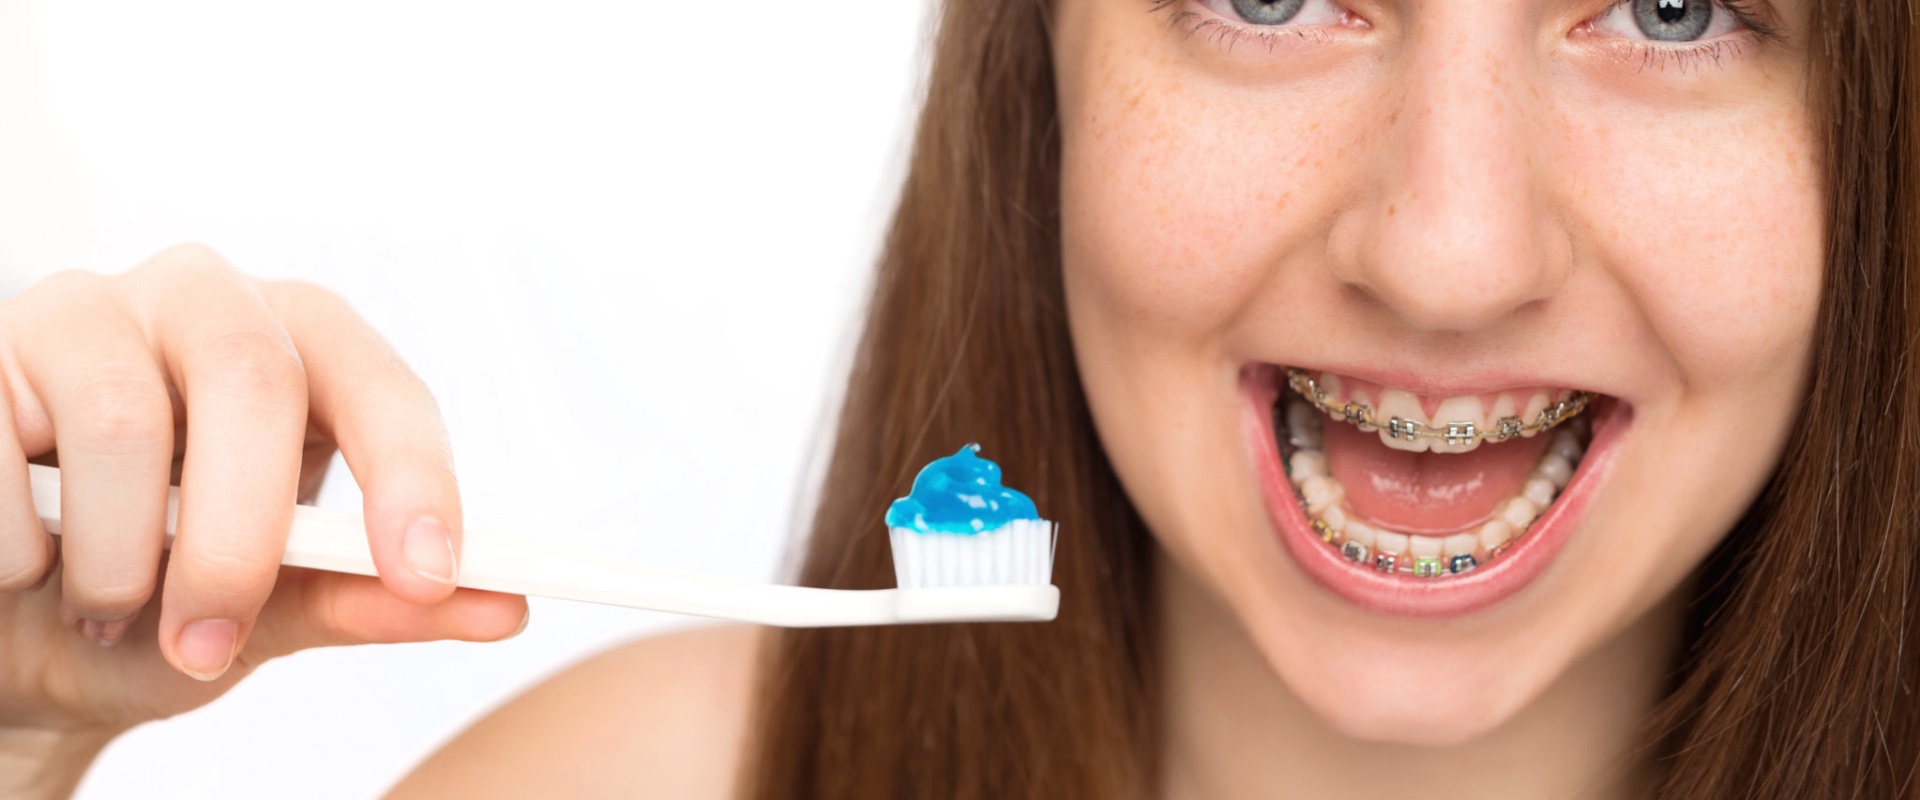 Preventing Gum Disease During Orthodontic Treatment: A Guide for Braces Wearers